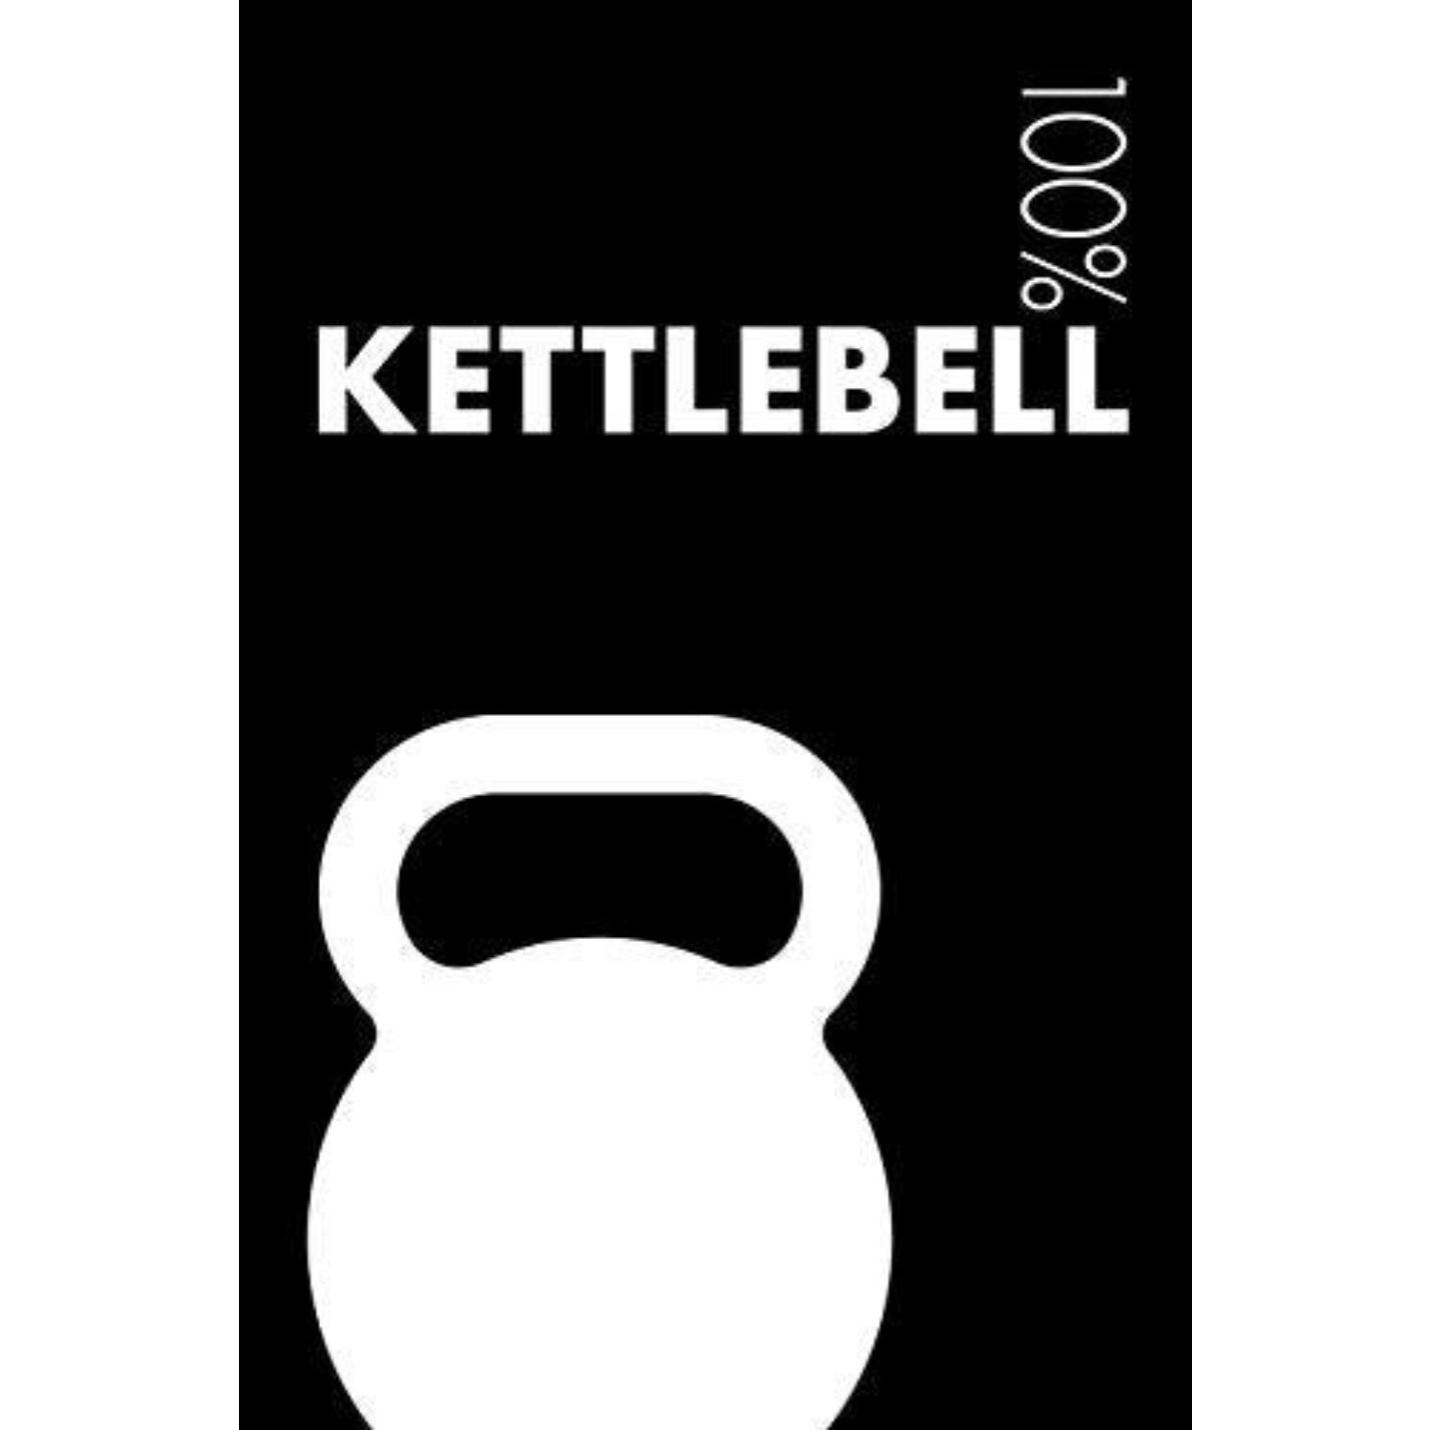 Kettlebell Notebook: Blank Lined Kettlebell Journal for Practitioner and Coach - happygetfit.com